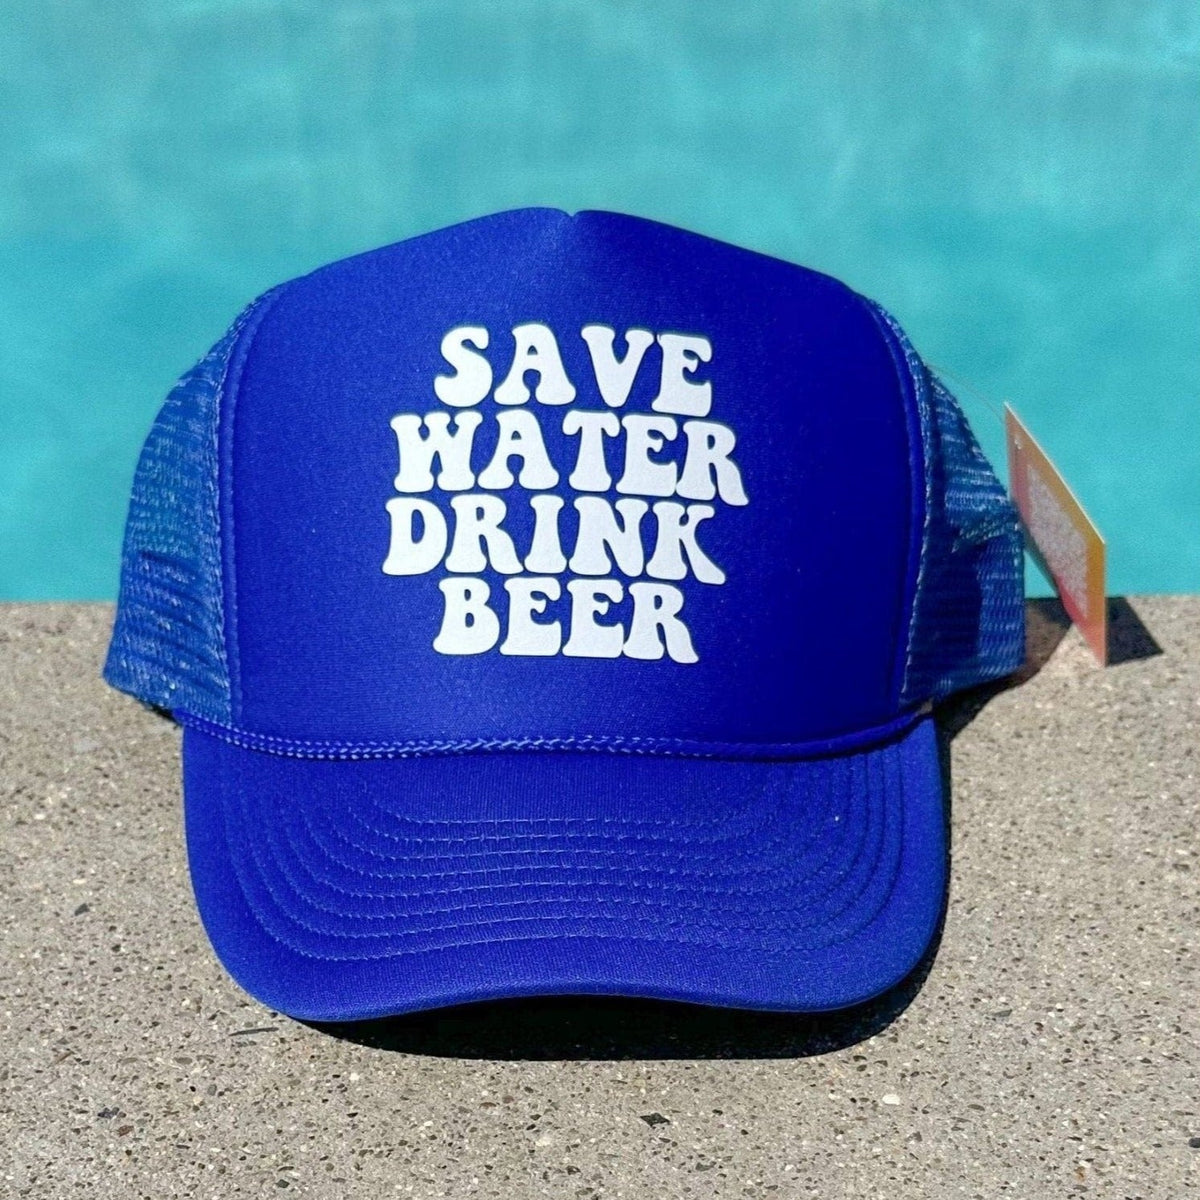 Save Water | Blue and White Trucker Hat by Haute Sheet | Funny Alcohol Related Hats TheFringeCultureCollective